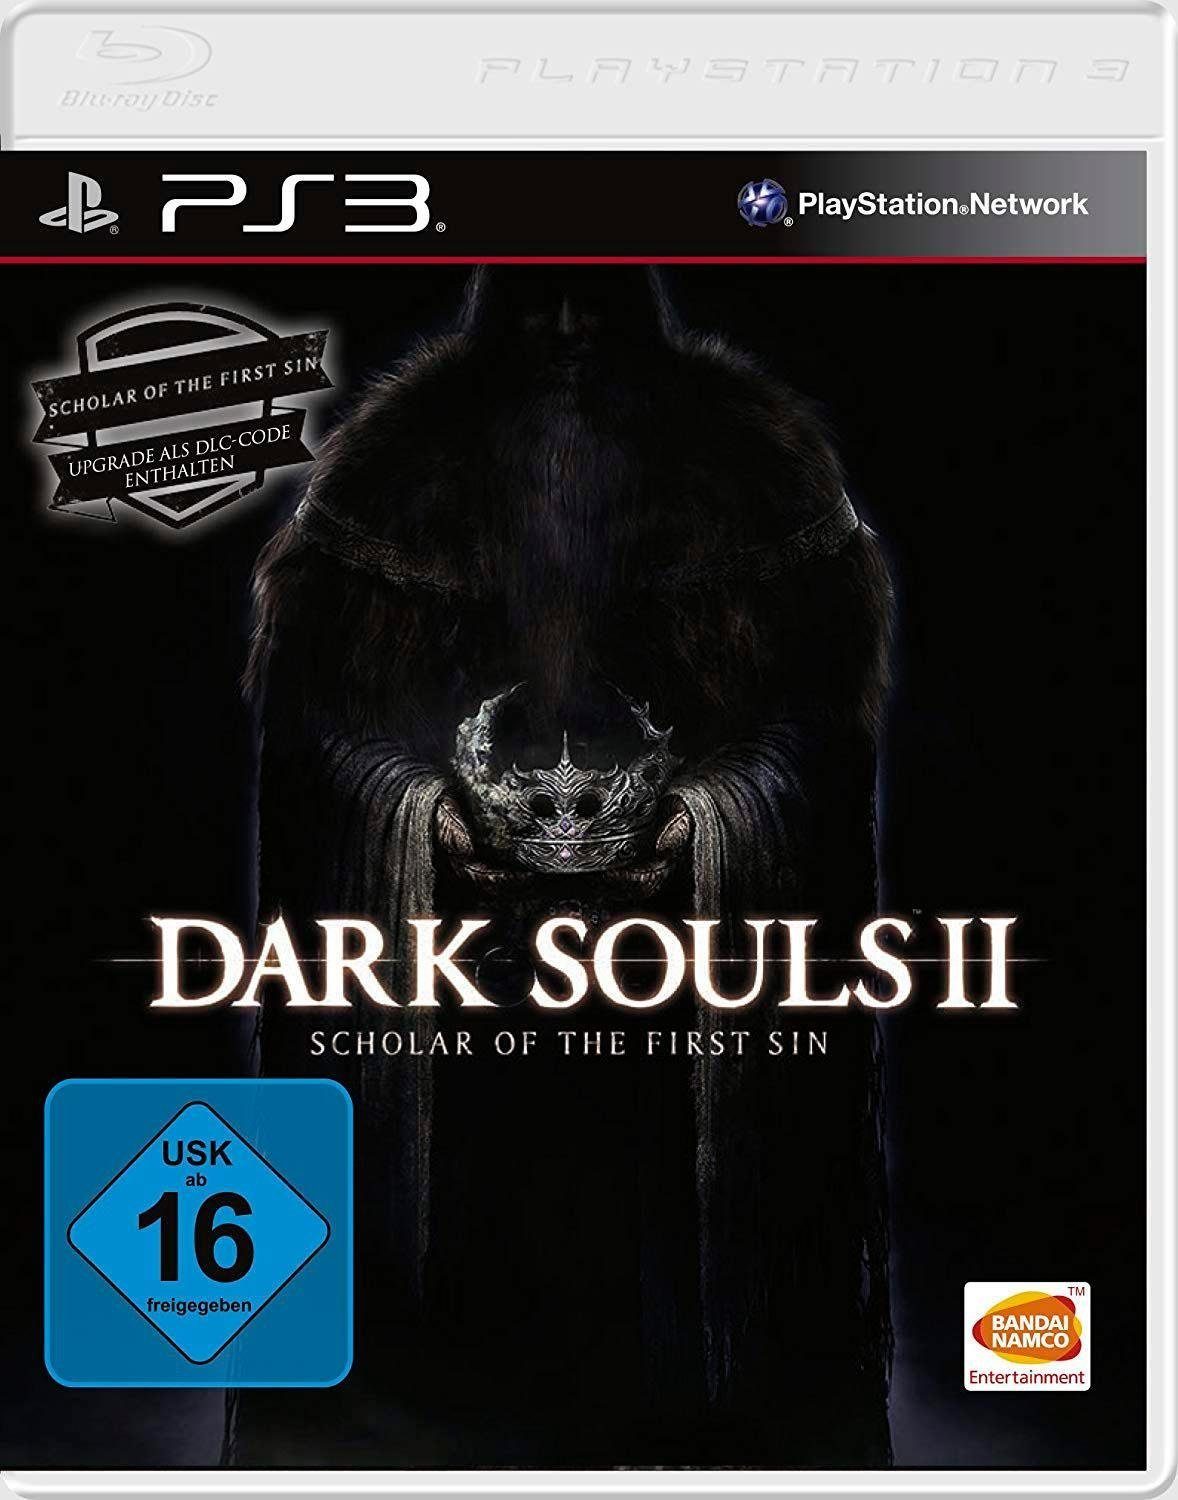 3, First Software 2: Of Dark Sin Souls Pyramide Scholar The PlayStation